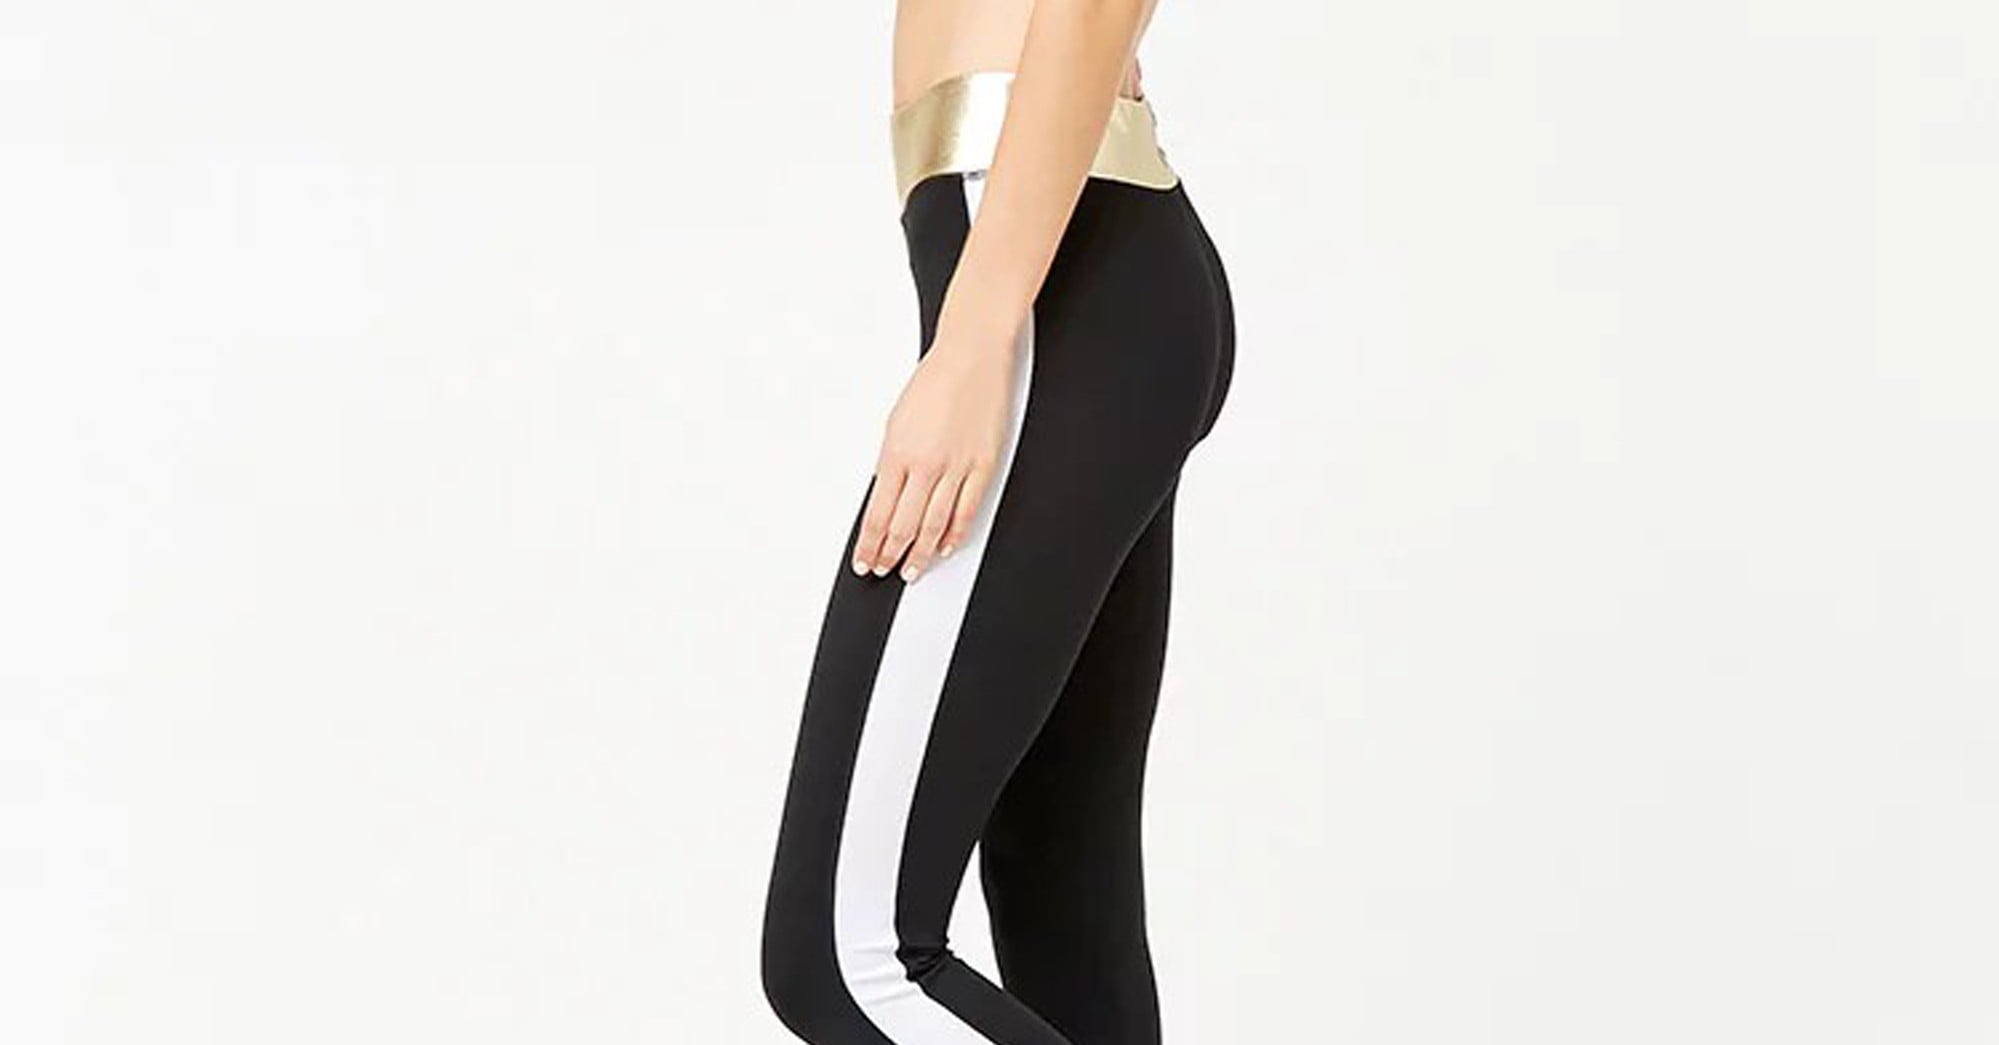 ATHENA ACTIVE Ankle length legging with fold over panel